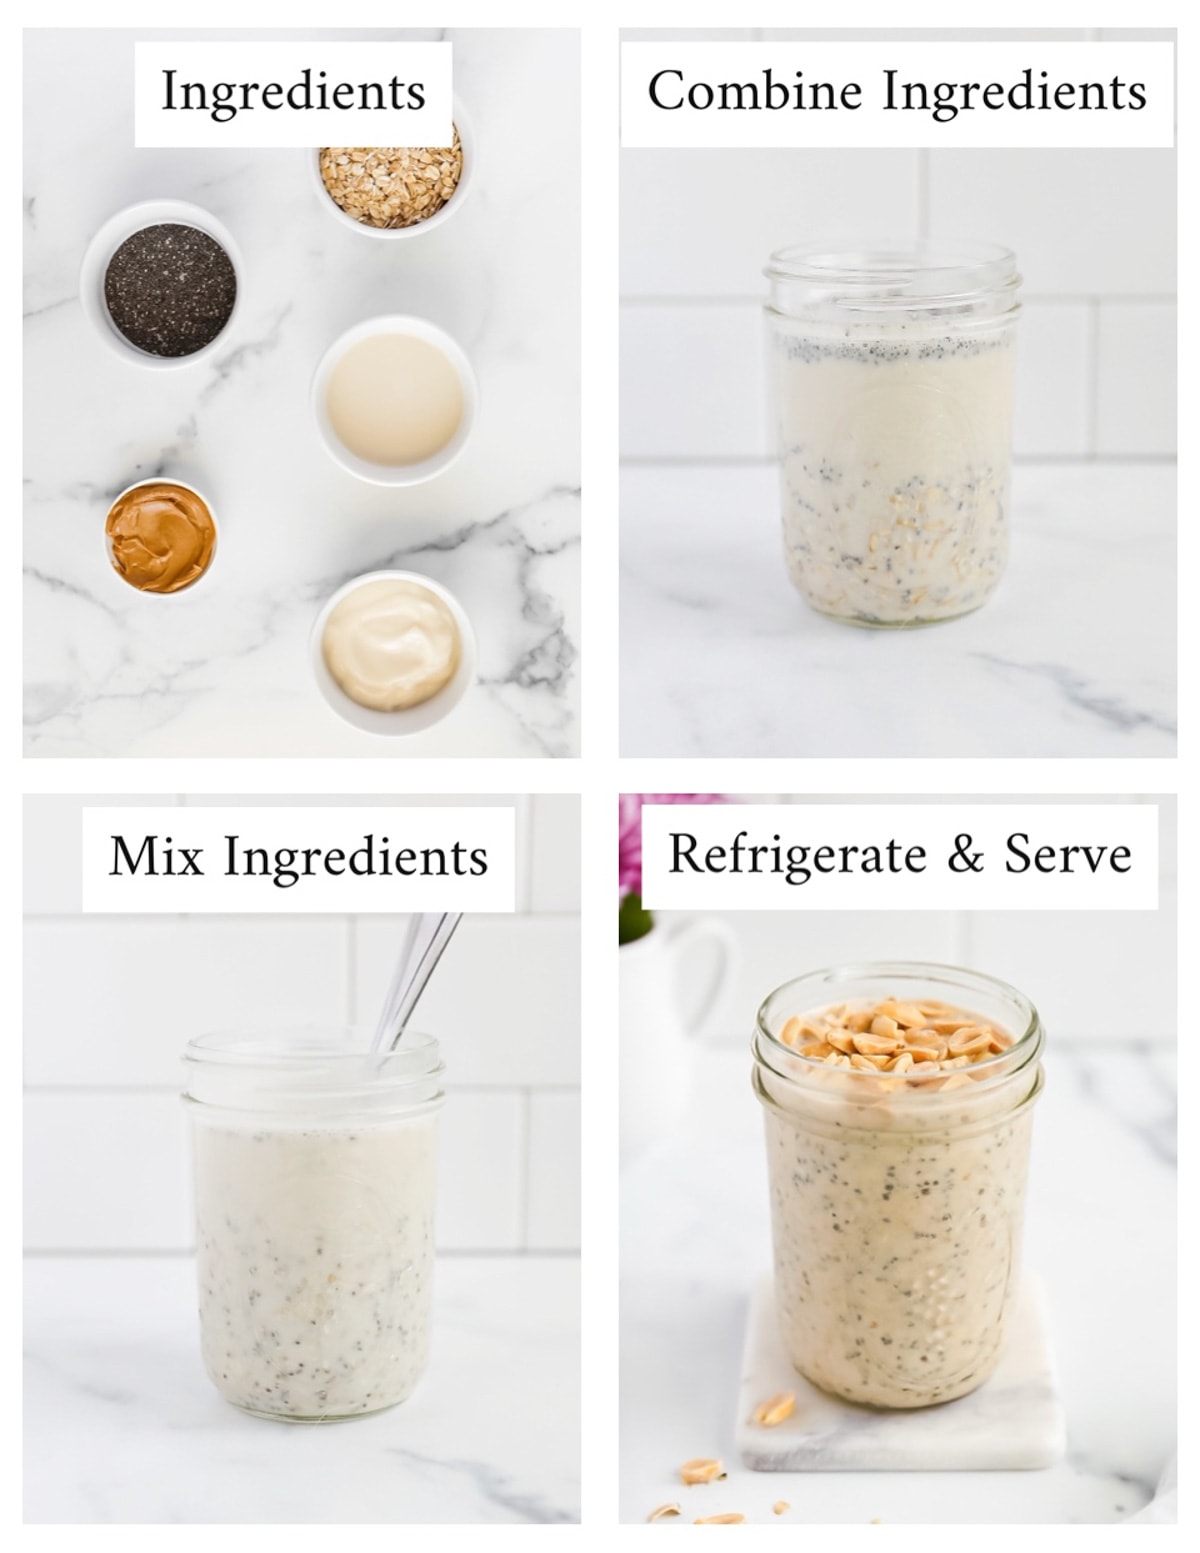 Four pictures including: ingredients with oats, plant based milk and yogurt, chia seeds, and peanut butter, 2-combine ingredients with all ingredients in a glass jar, 3-mix ingredients with a spoon having just mixed the ingredients in the jar, 4-refrigerate and serve, the finished overnight oats with peanuts on top